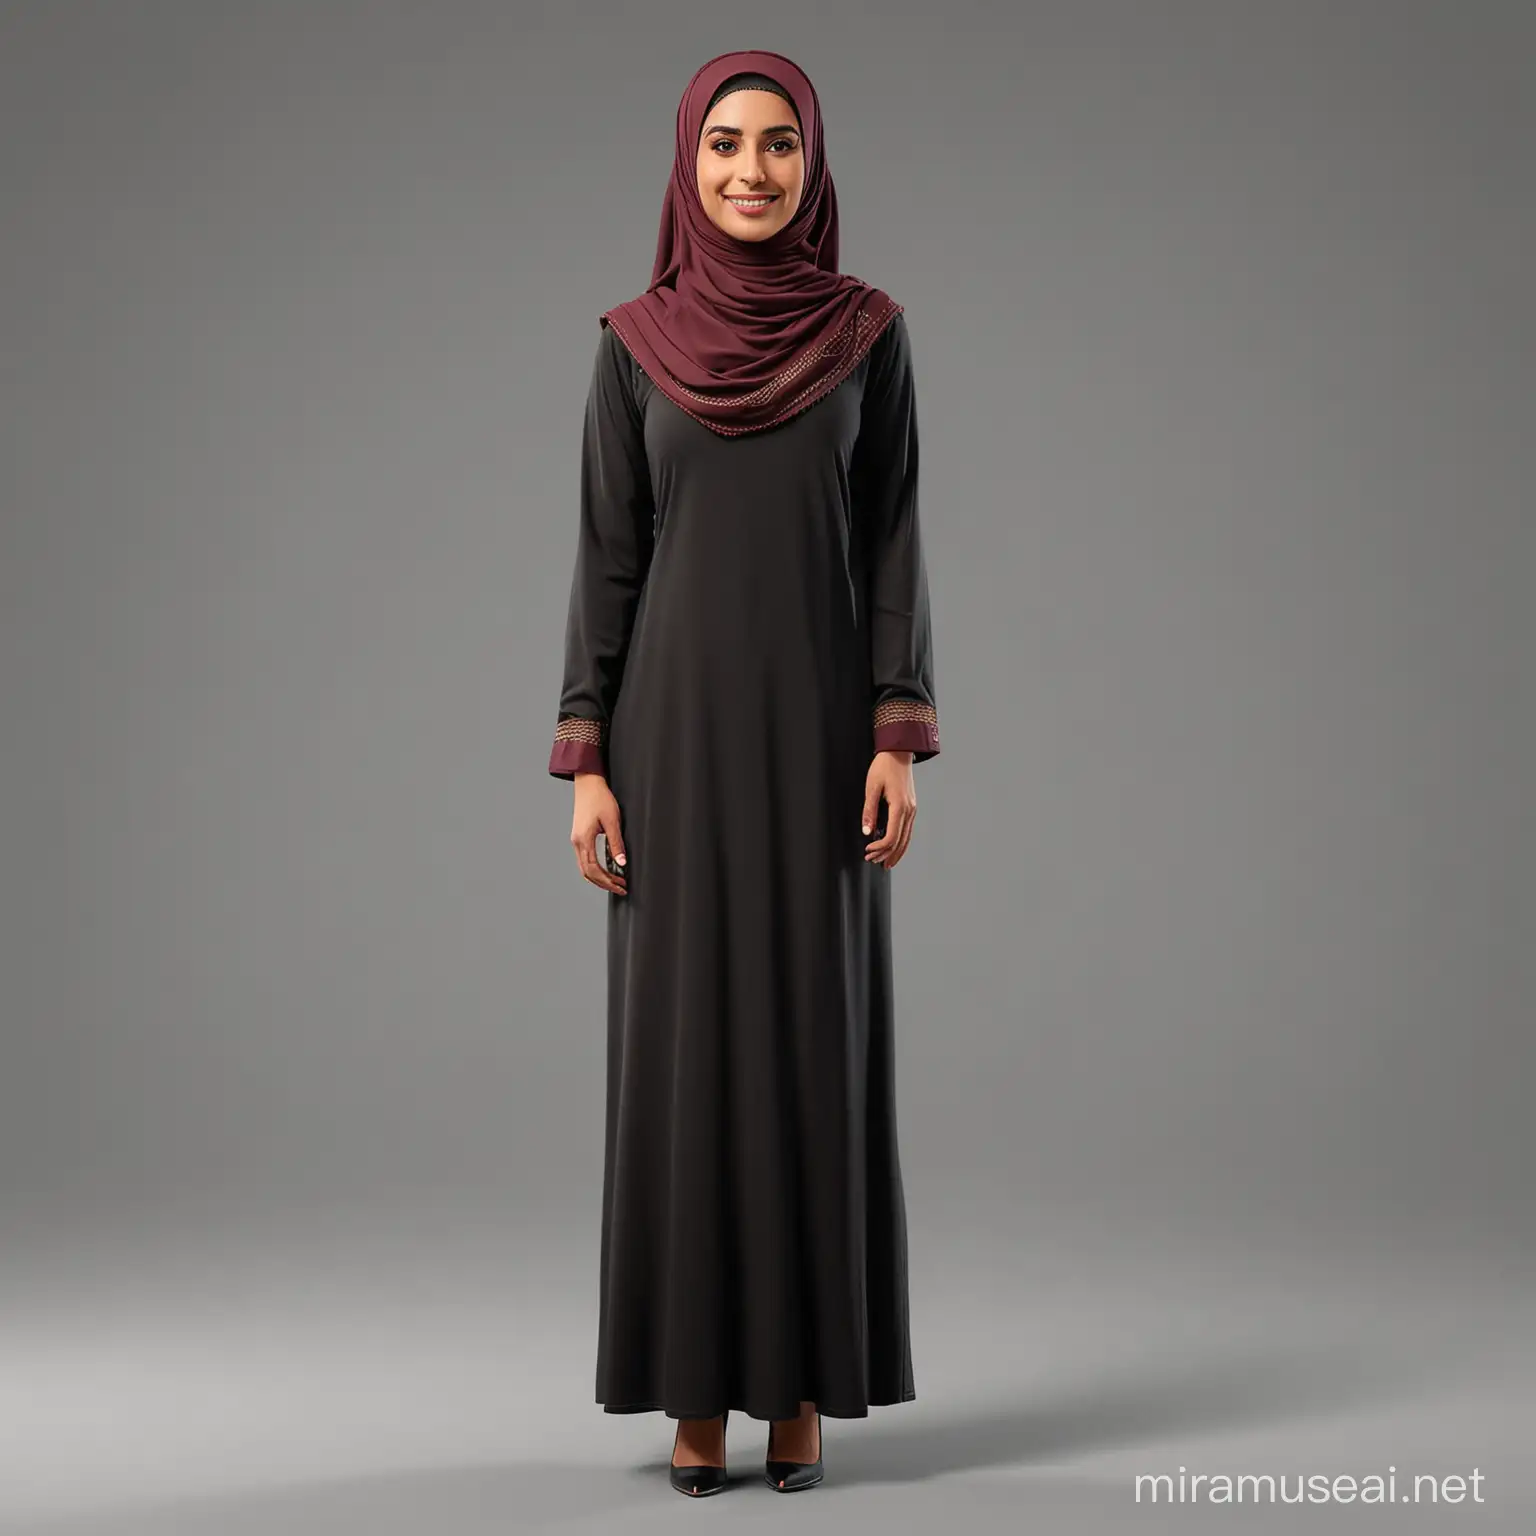 Create a female 3D cartoon avtar of a qatar women with plain backround full length, from head to toe in back local attire
